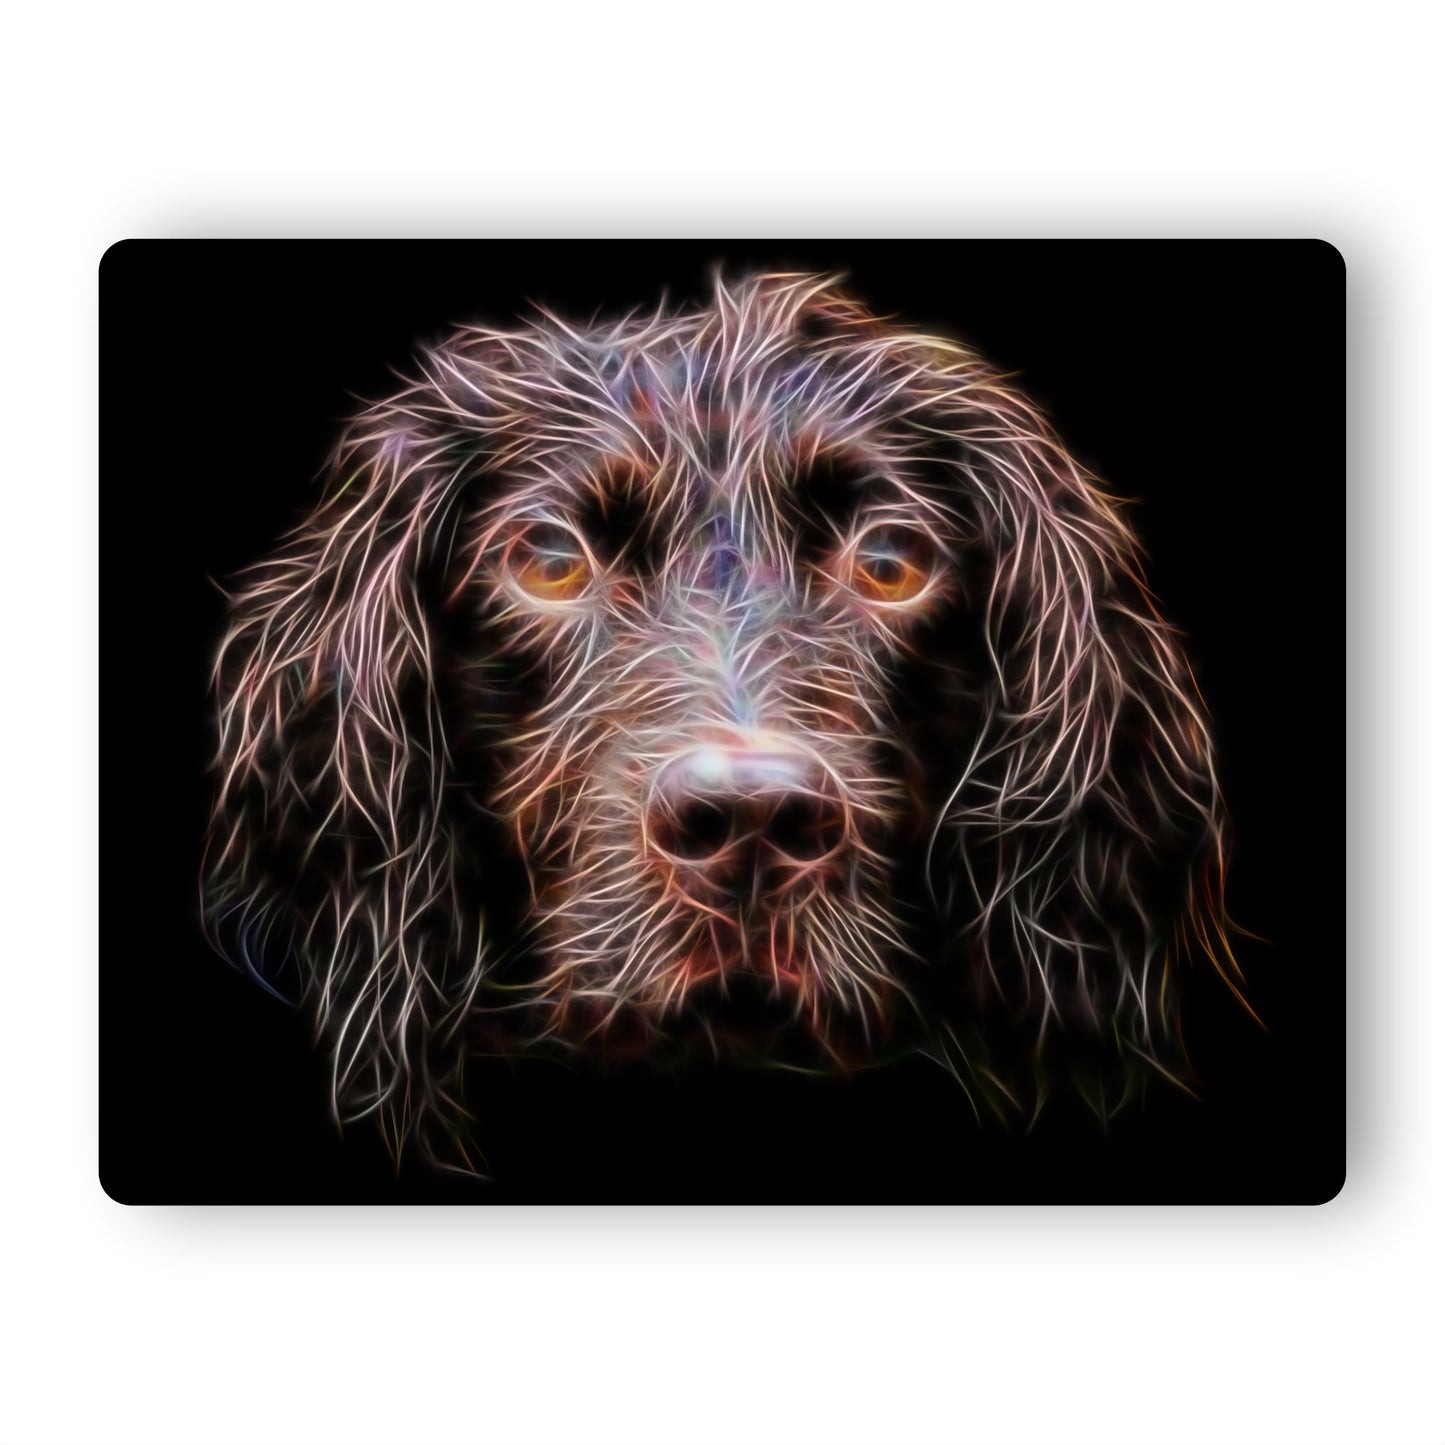 Chocolate Working Cocker Spaniel Metal Wall Plaque  with Stunning Fractal Art Design